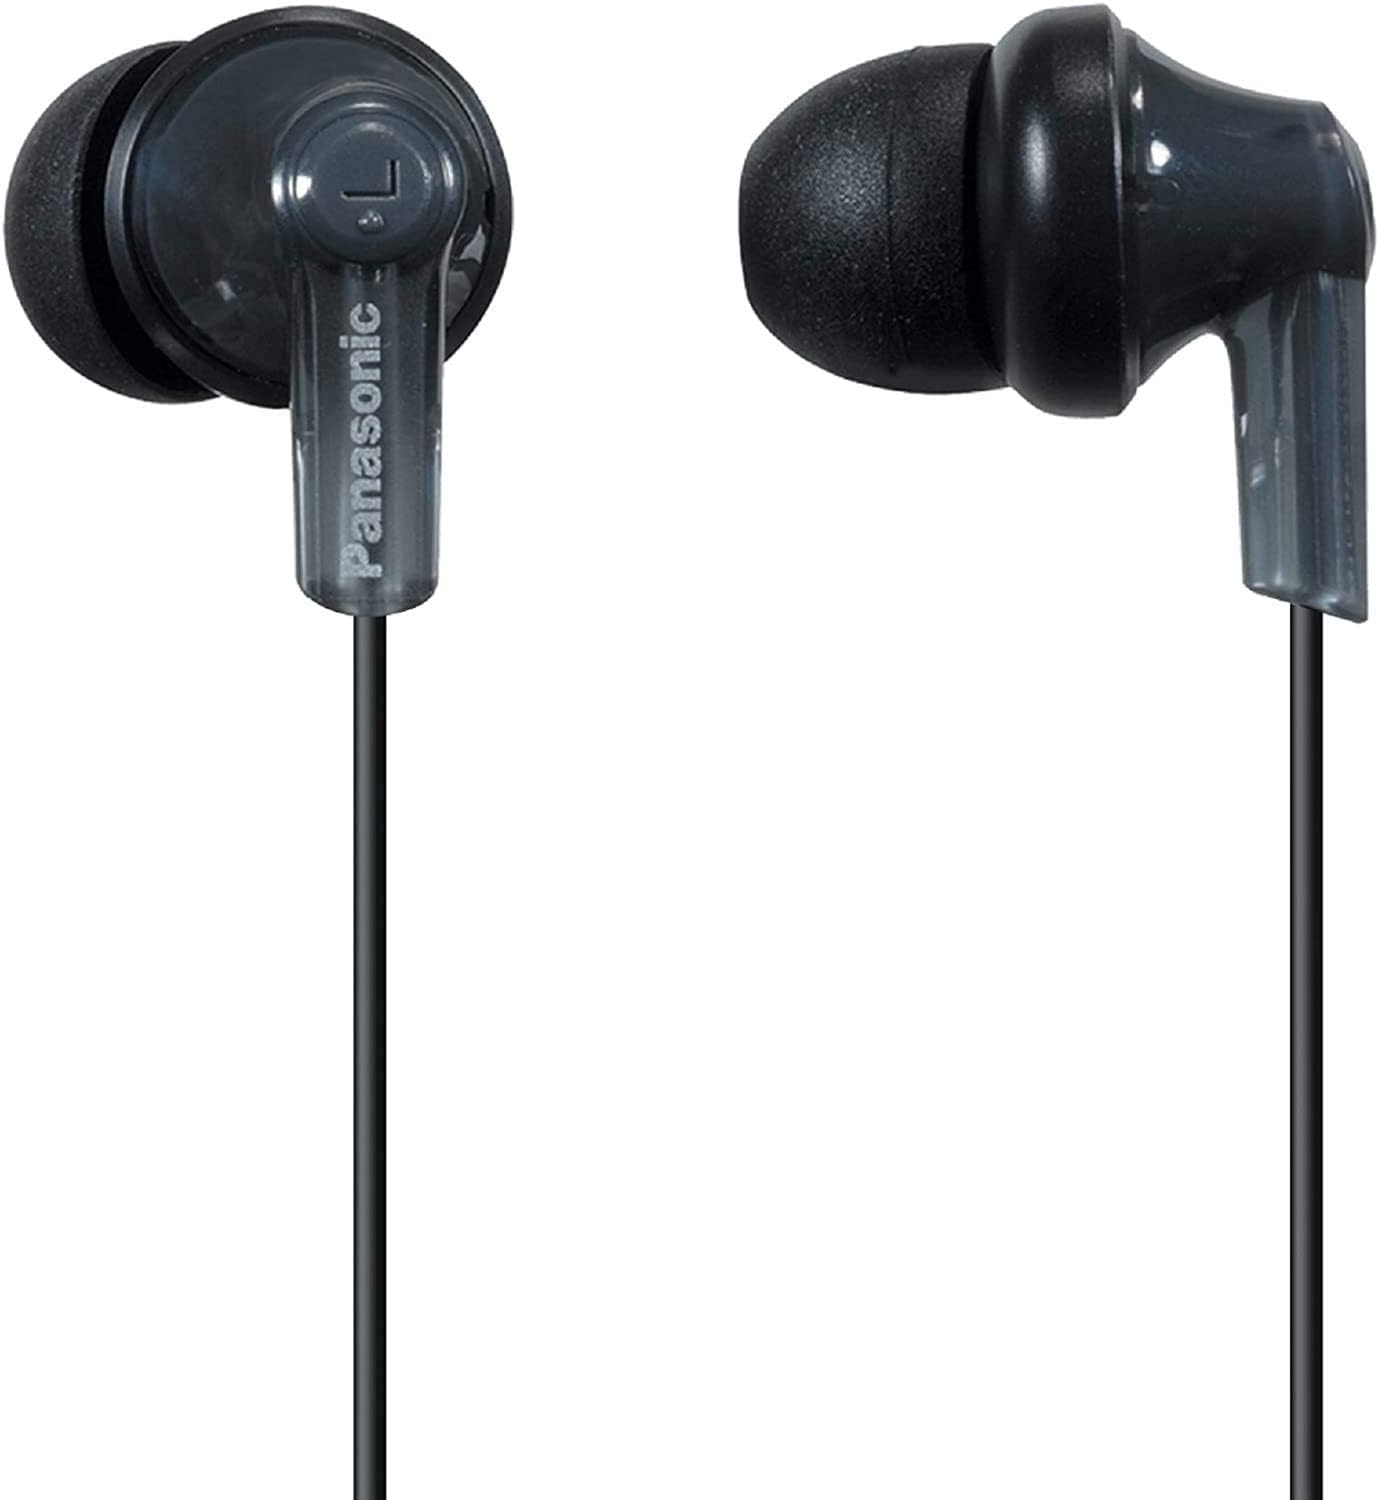 Panasonic ErgoFit Wired Earbuds, In-Ear Headphones with Dynamic Crystal-Clear Sound and Ergonomic Custom-Fit Earpieces (S/M/L), 3.5mm Jack for Phones and Laptops, No Mic - RP-HJE120-K (Black)